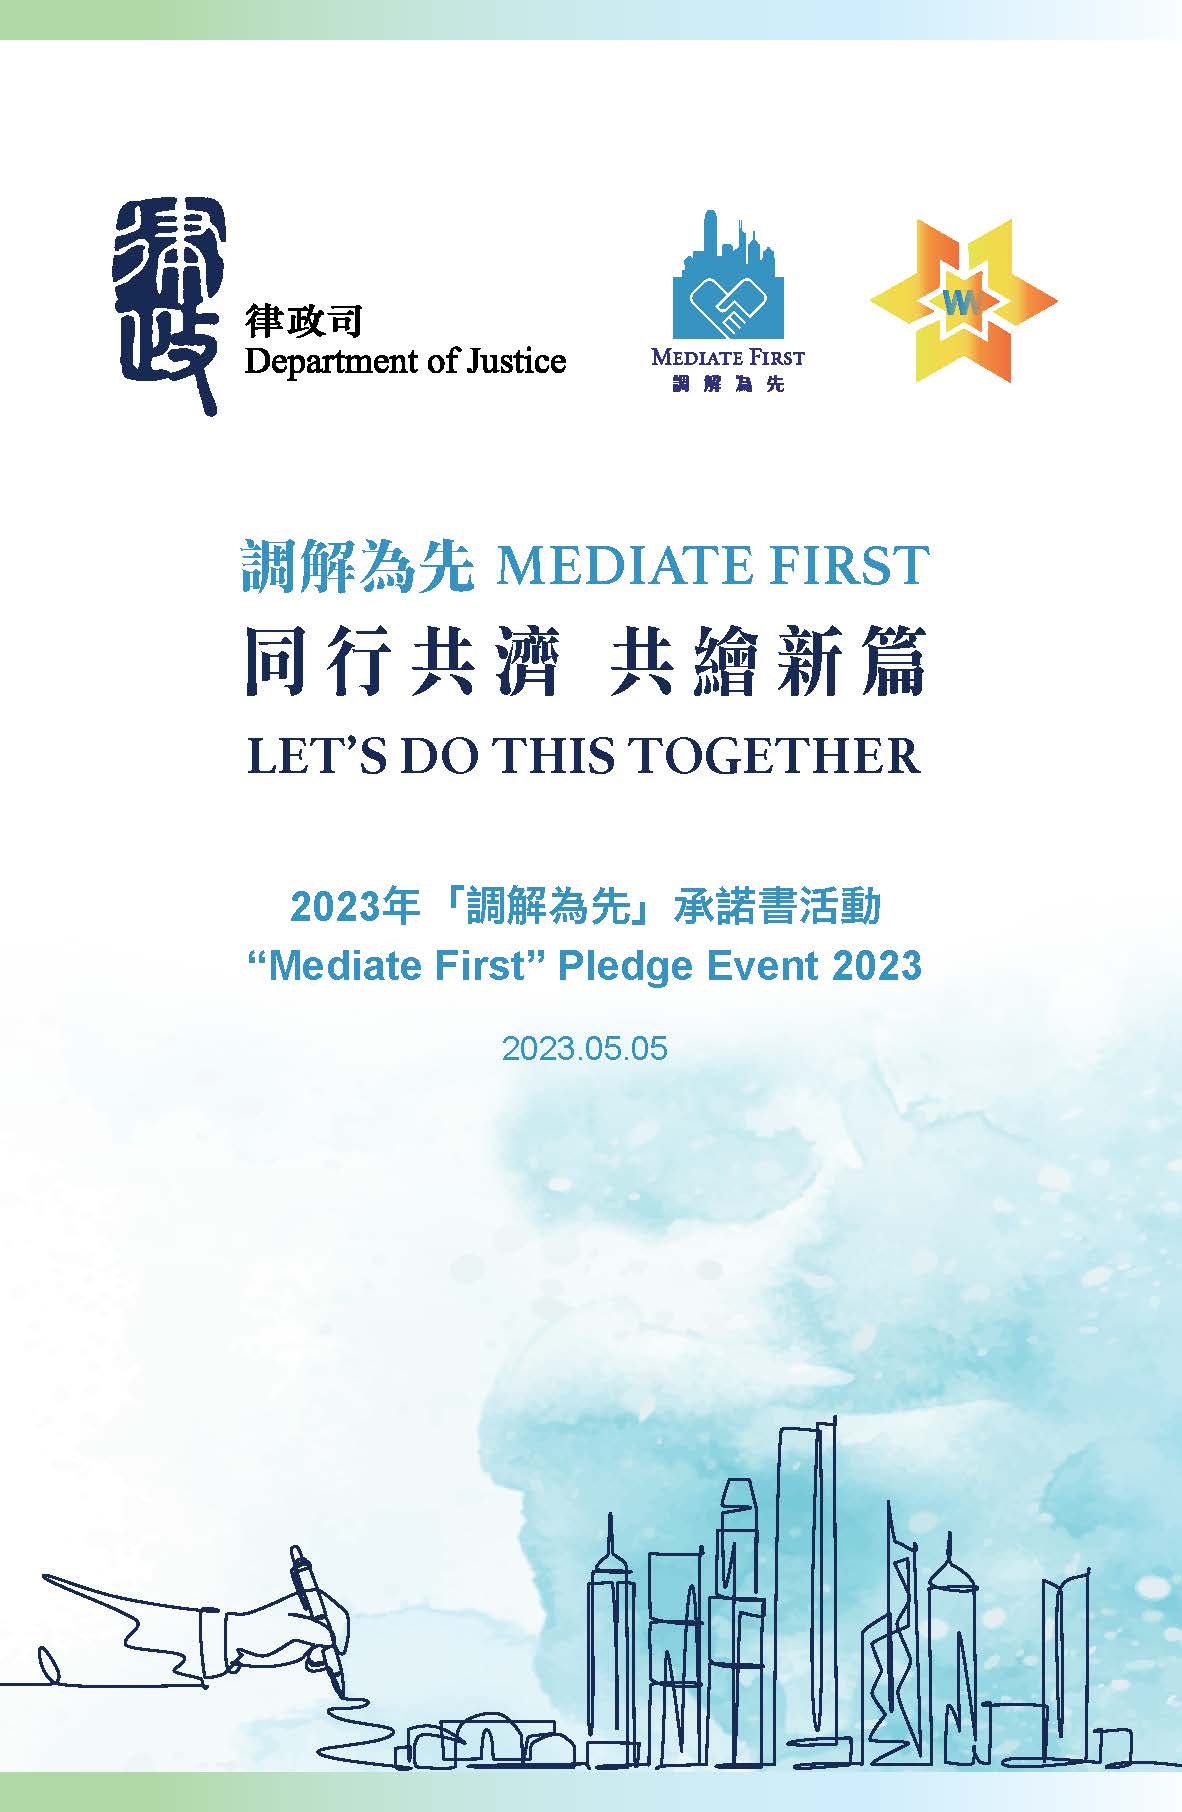 “Mediate First” Pledge Event 2023 (Chinese only)